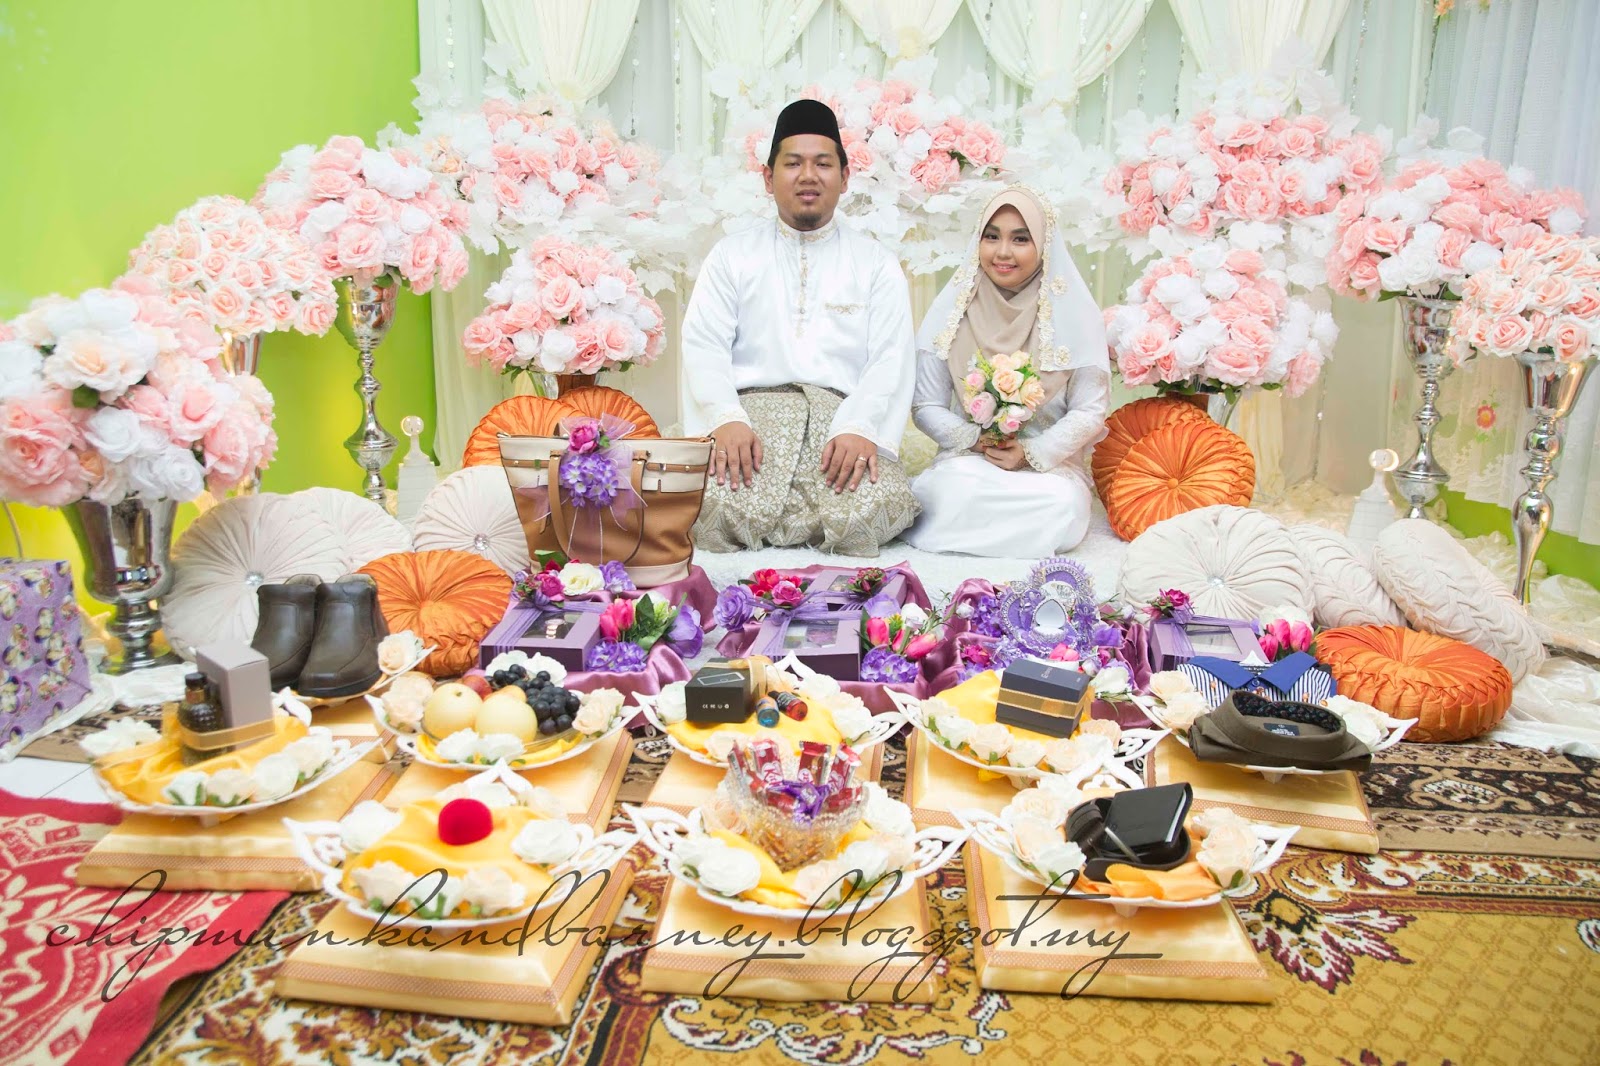 All About Life Wedding Story 10 Hantaran  For Her